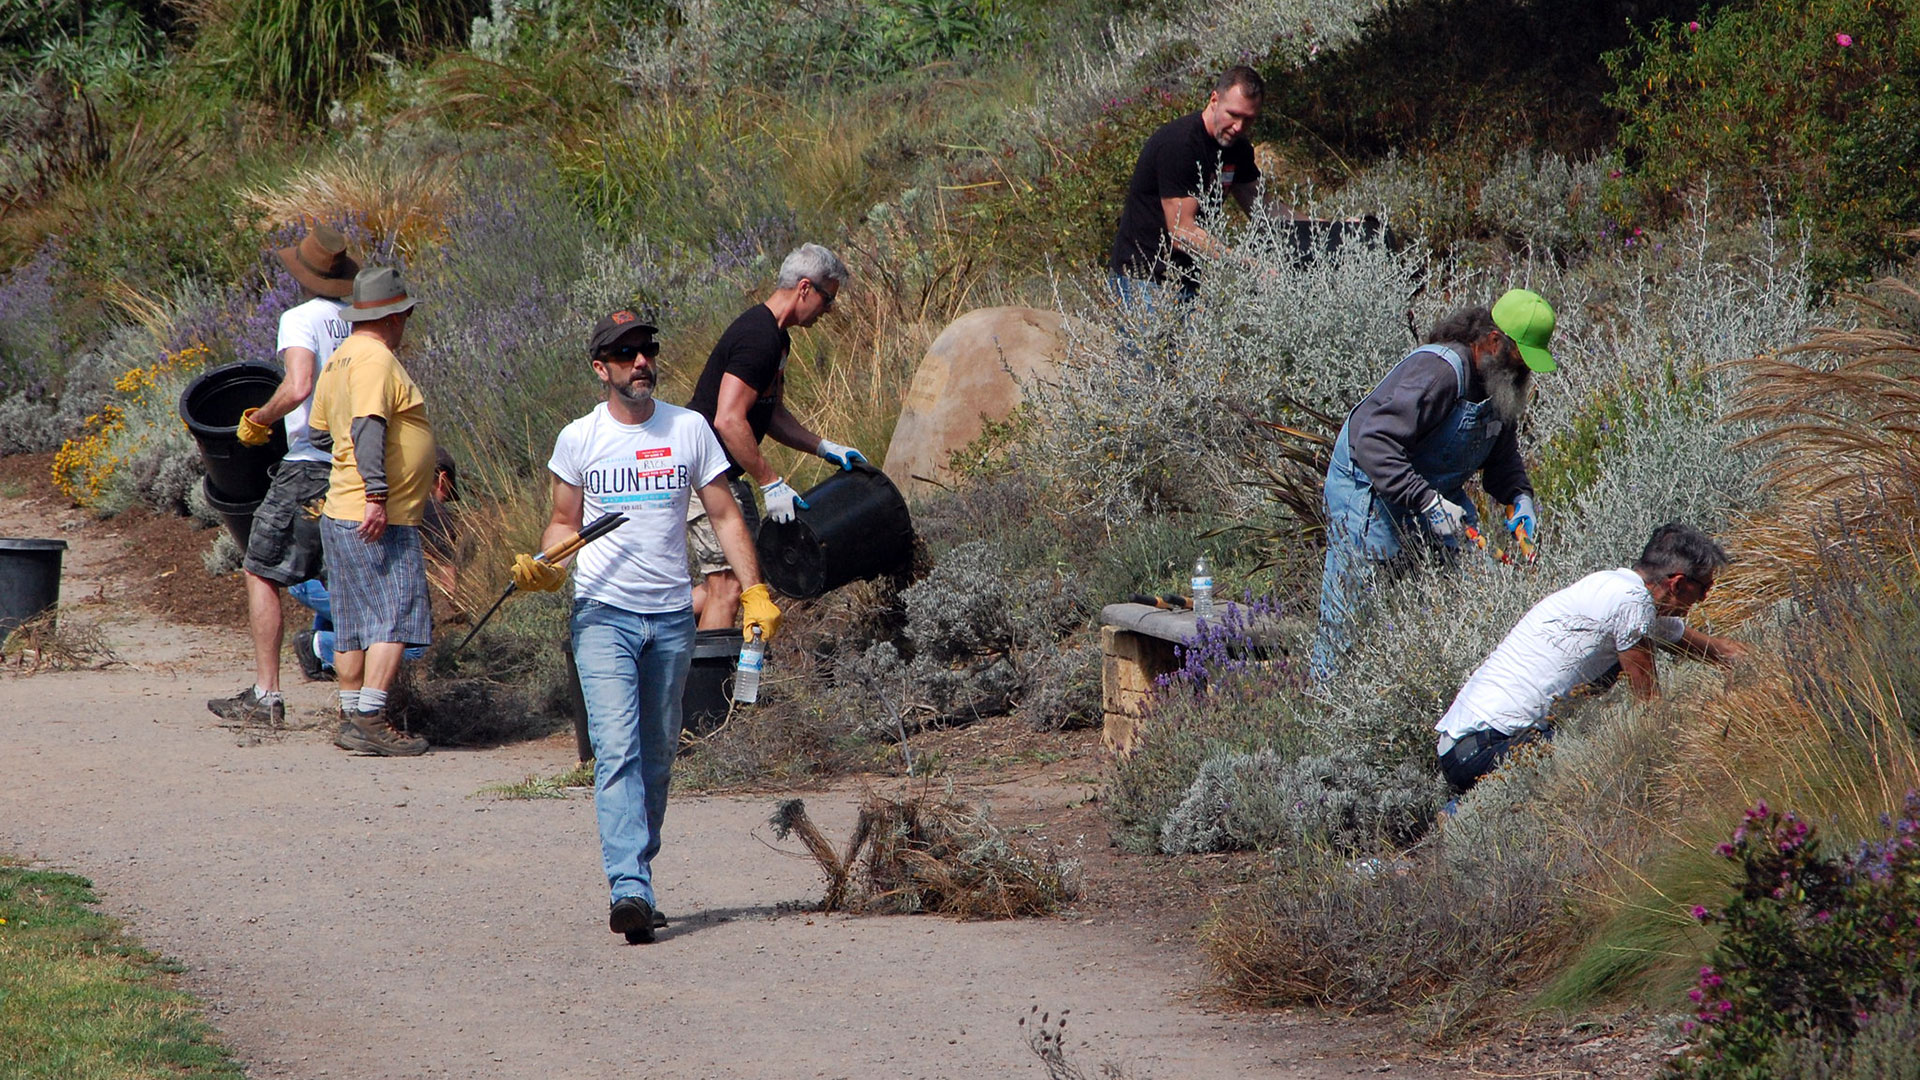 A group of five people lean into a hillside, working with the plants in the ground. A sixth man walks towards us wearing a shirt that says "volunteer."